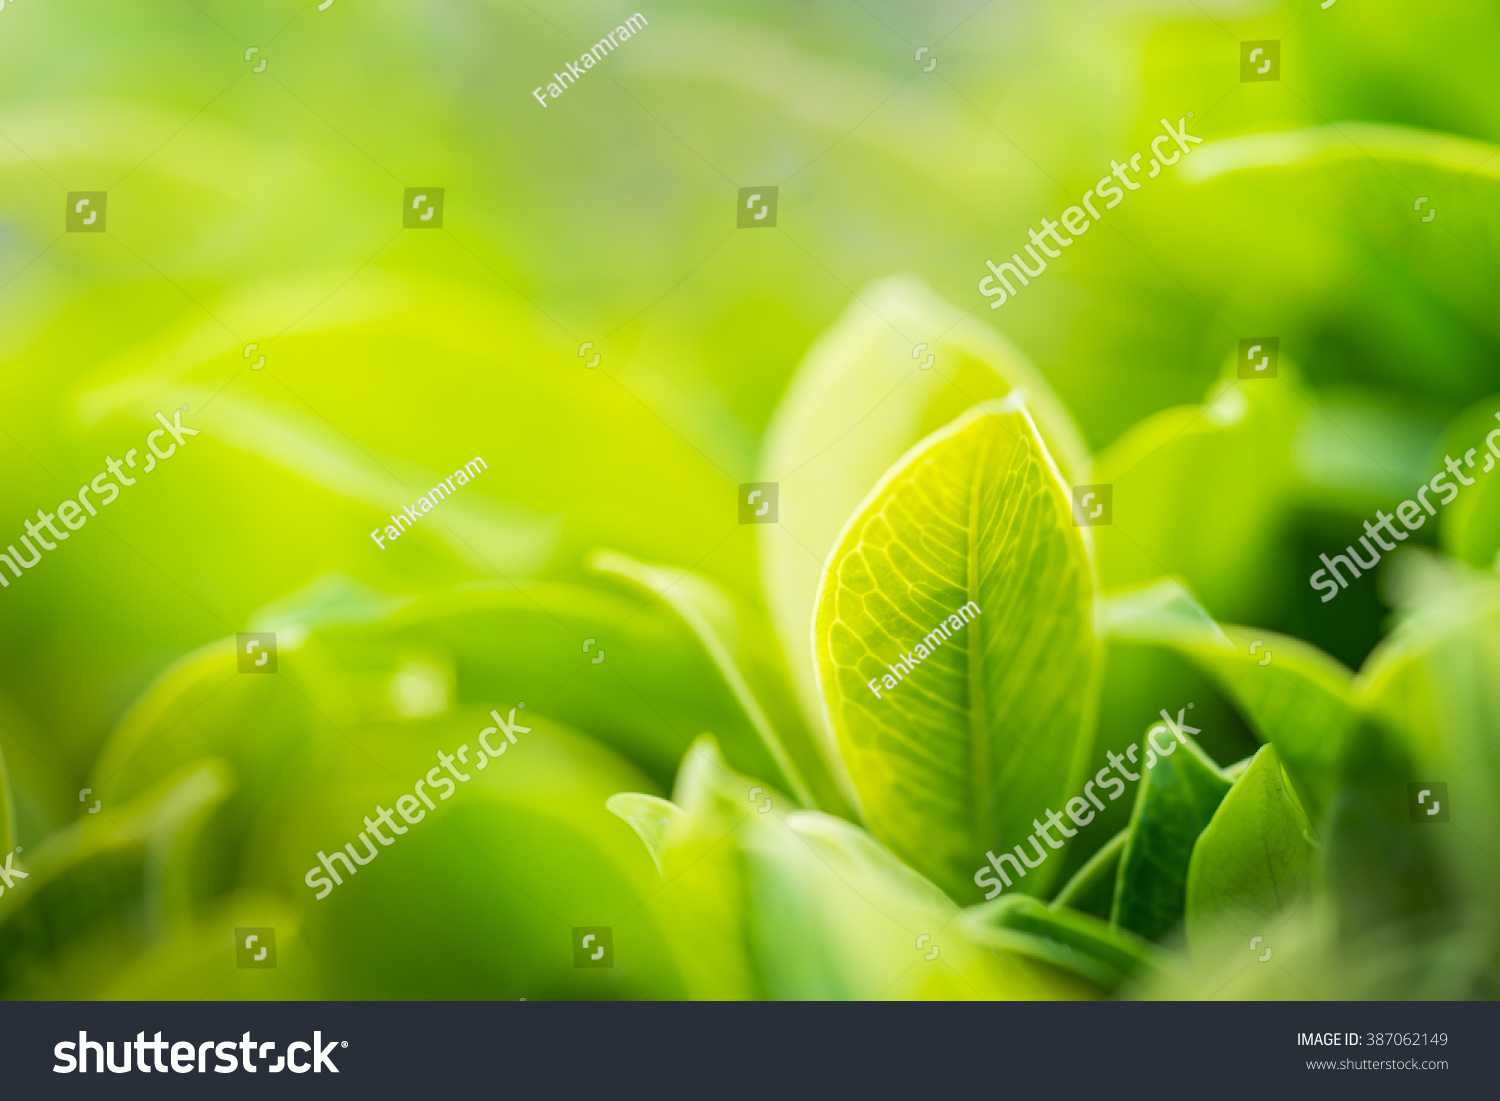 Nature of green leaf in garden at summer under sunlight. Natural green leaves plants using as spring background environment ecology or greenery wallpaper #387062149